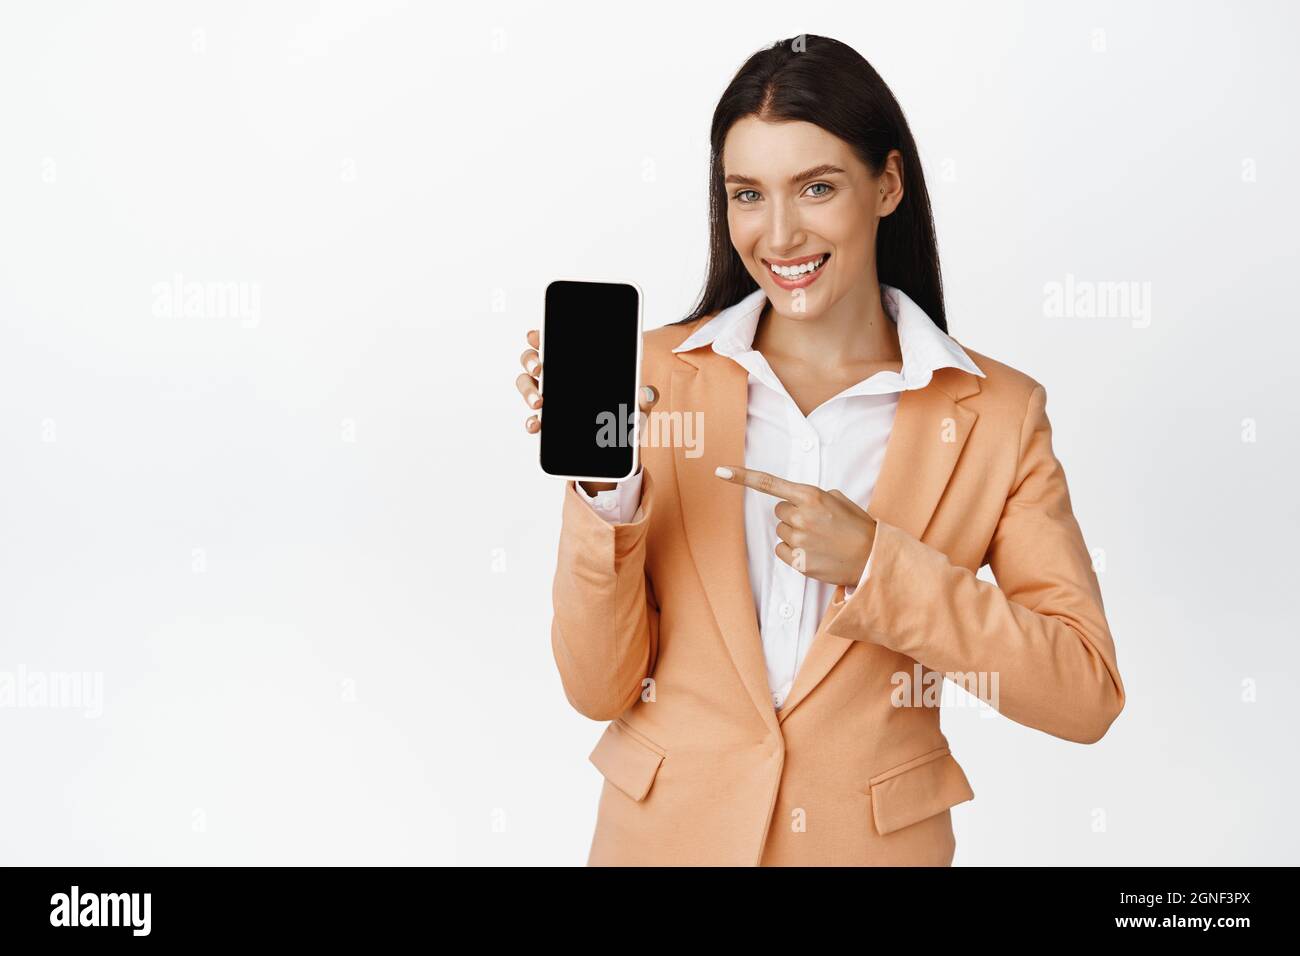 Smiling saleswoman pointing finger at mobile phone, recommending online store, showing app interface, standing over white background Stock Photo